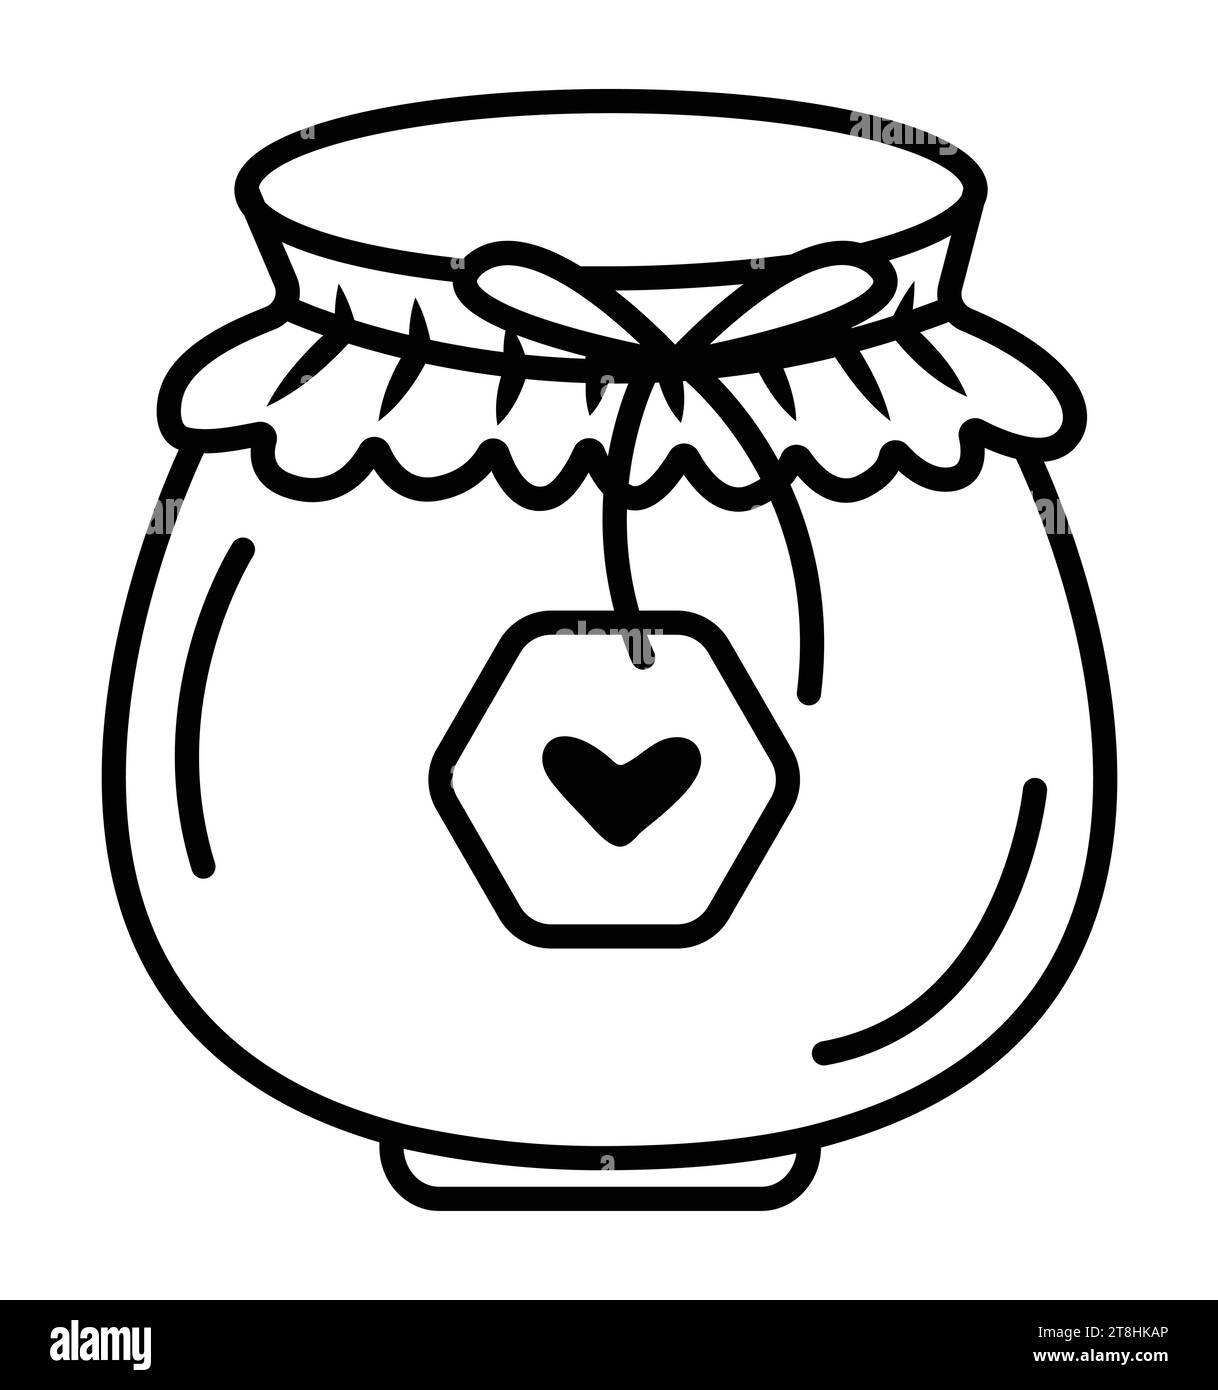 Black line cute jar doodle, vector icon of jam and honey, monochrome pictogram Stock Vector